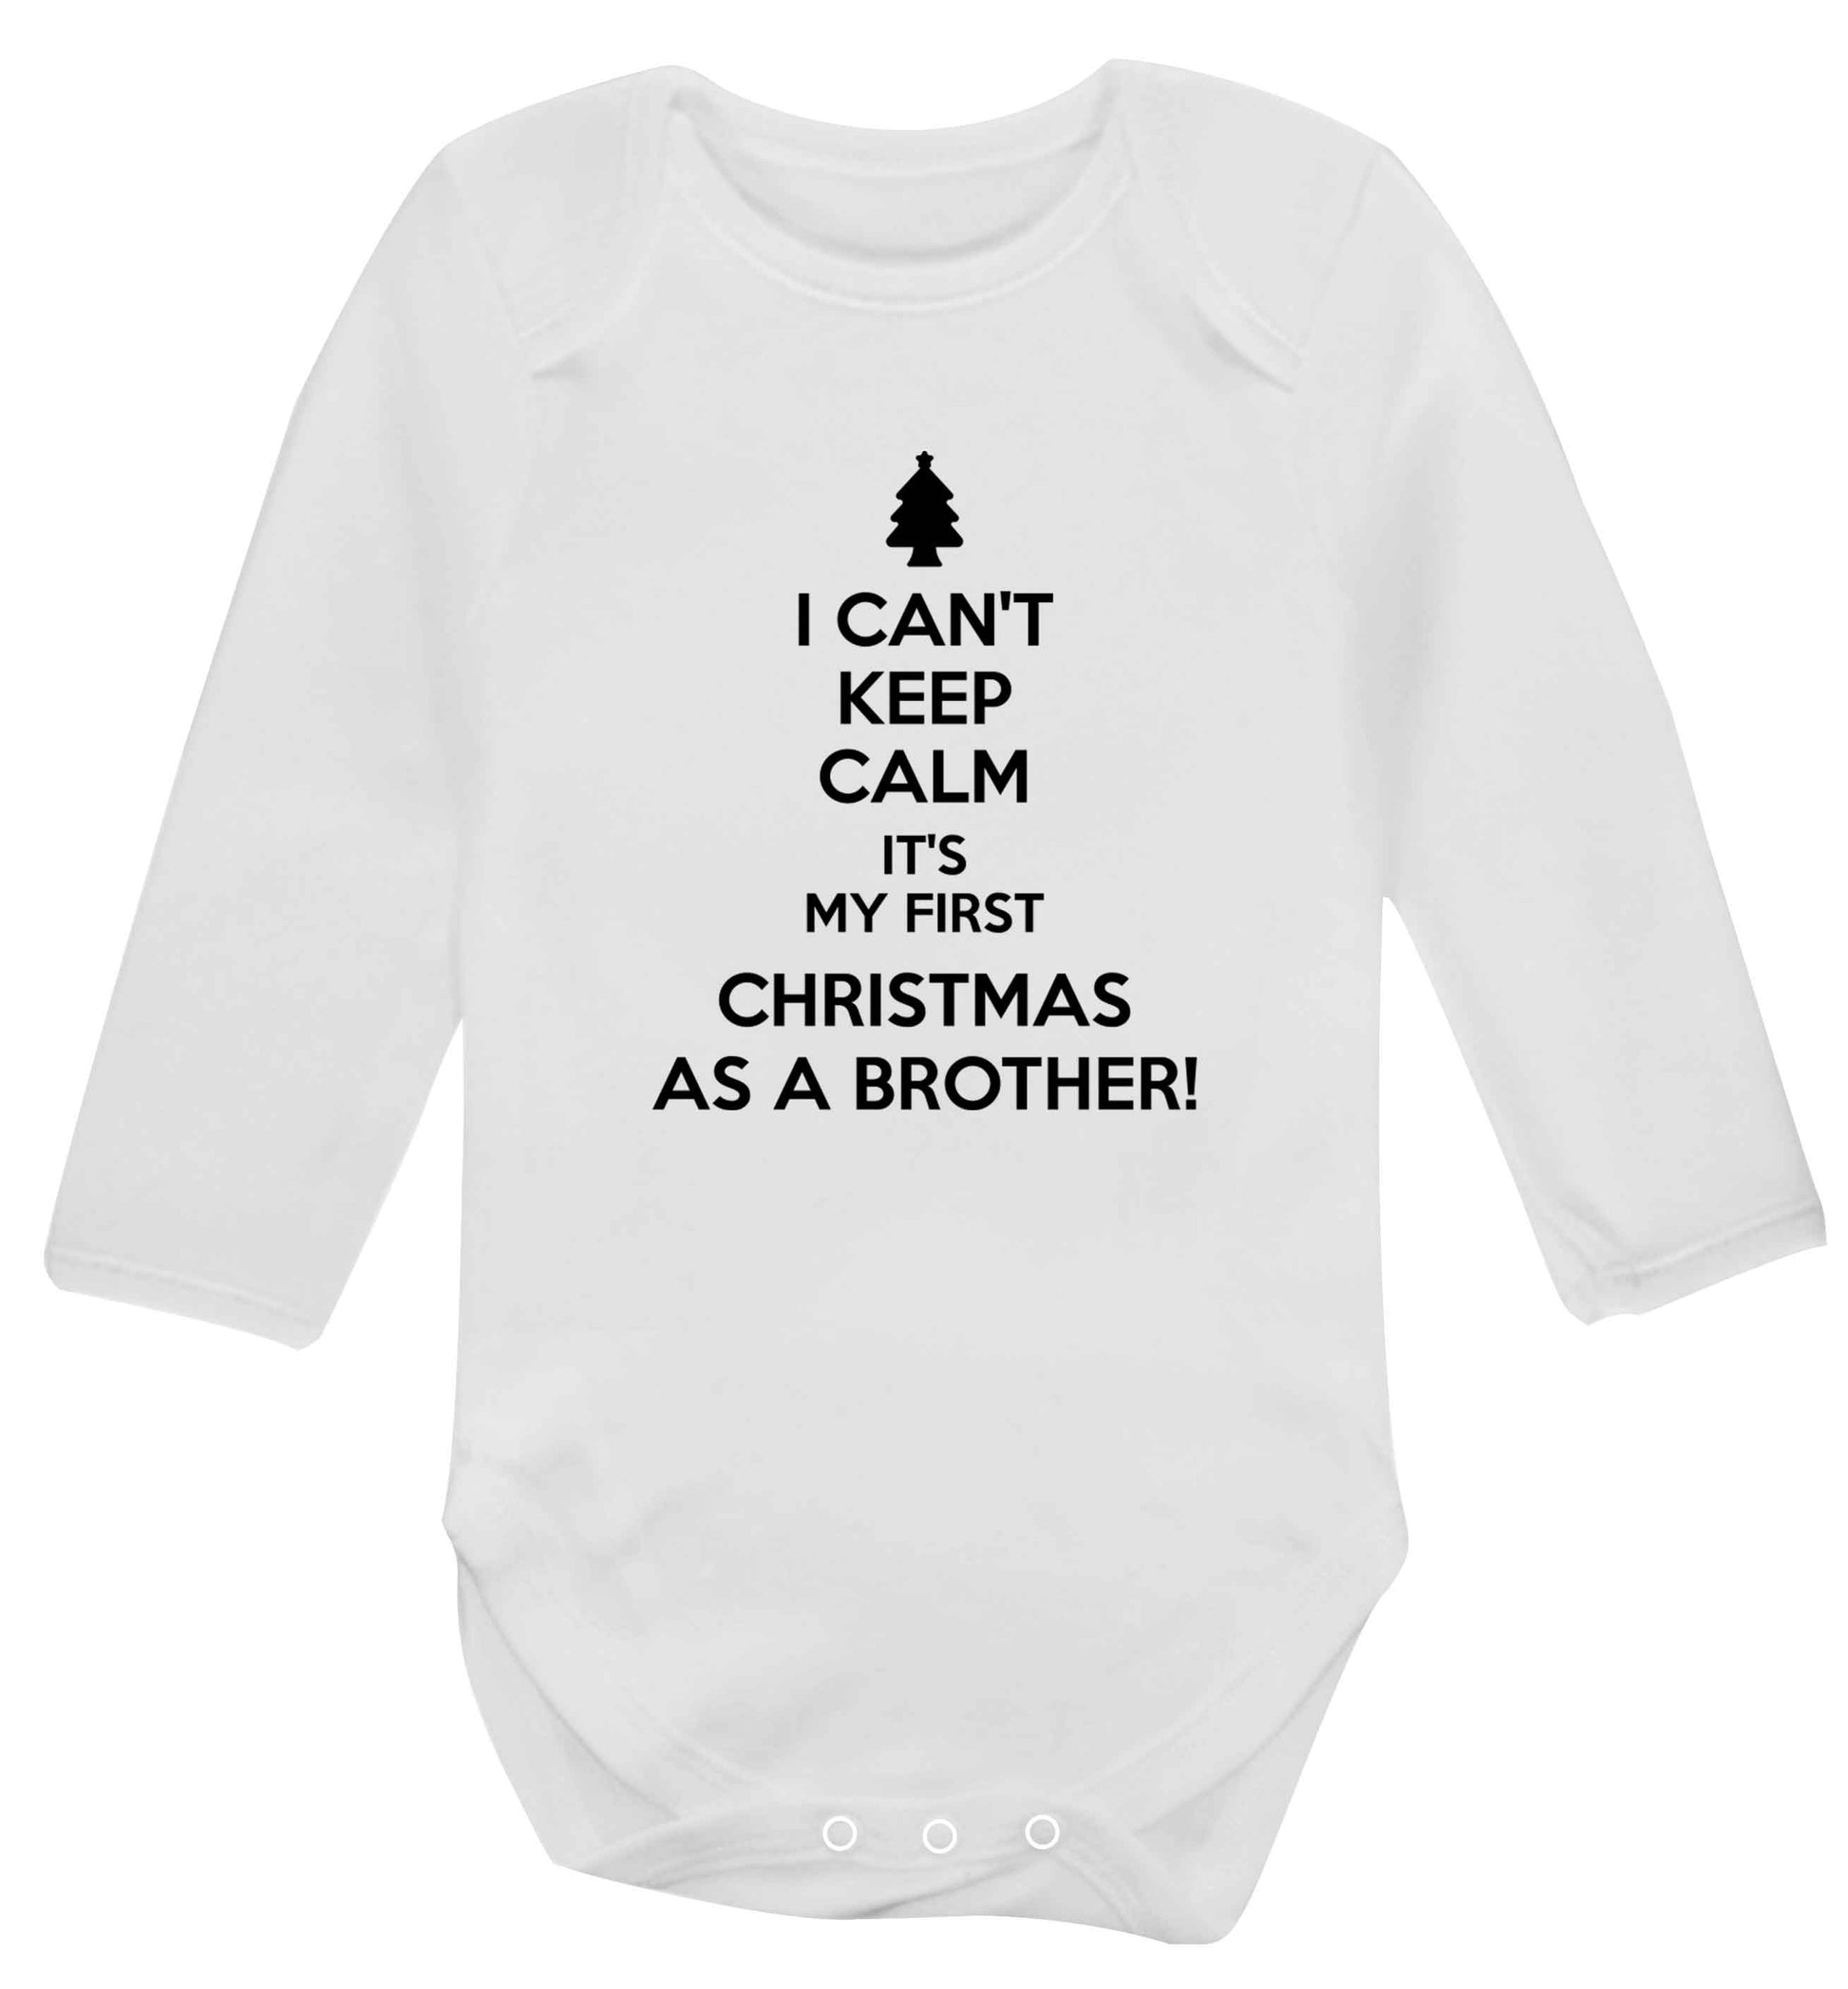 I can't keep calm it's my first Christmas as a brother! Baby Vest long sleeved white 6-12 months